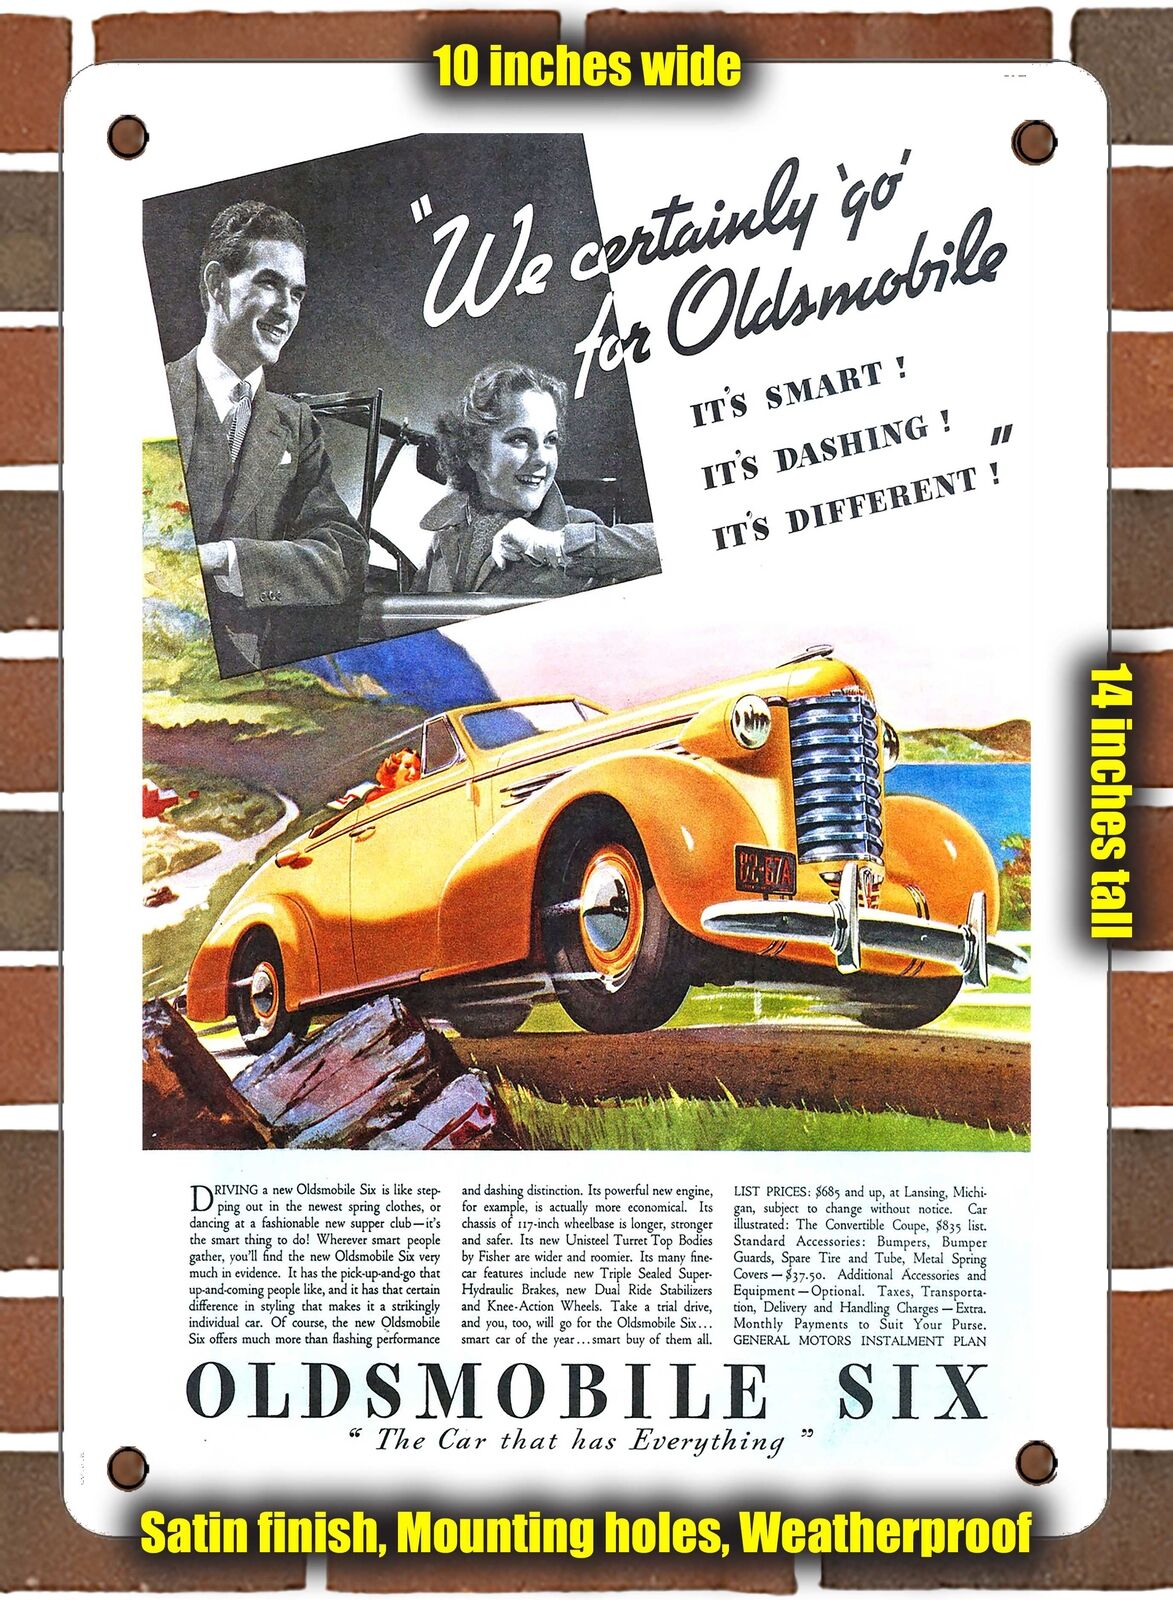 METAL SIGN - 1937 Oldsmobile 6 Convertible Coupe We Certainly Go for Oldsmobile